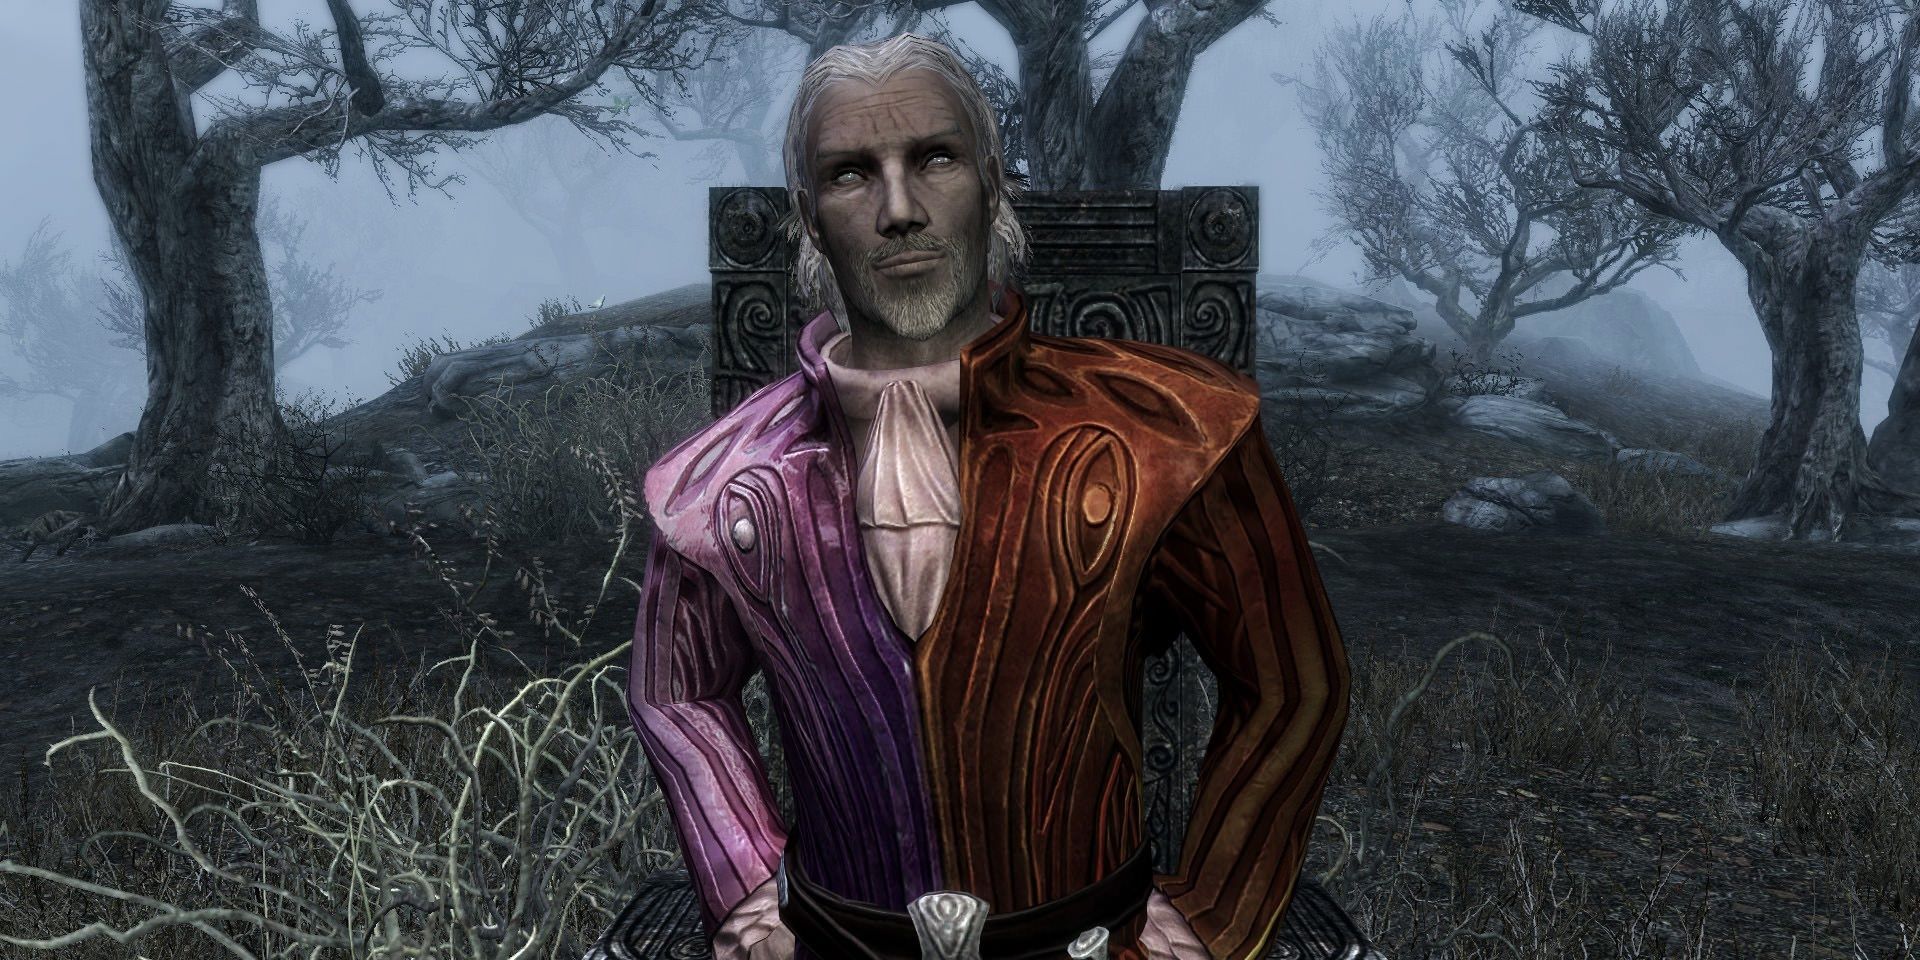 Sheogorath standing with his hands on his hips looking at the player in Skyrim